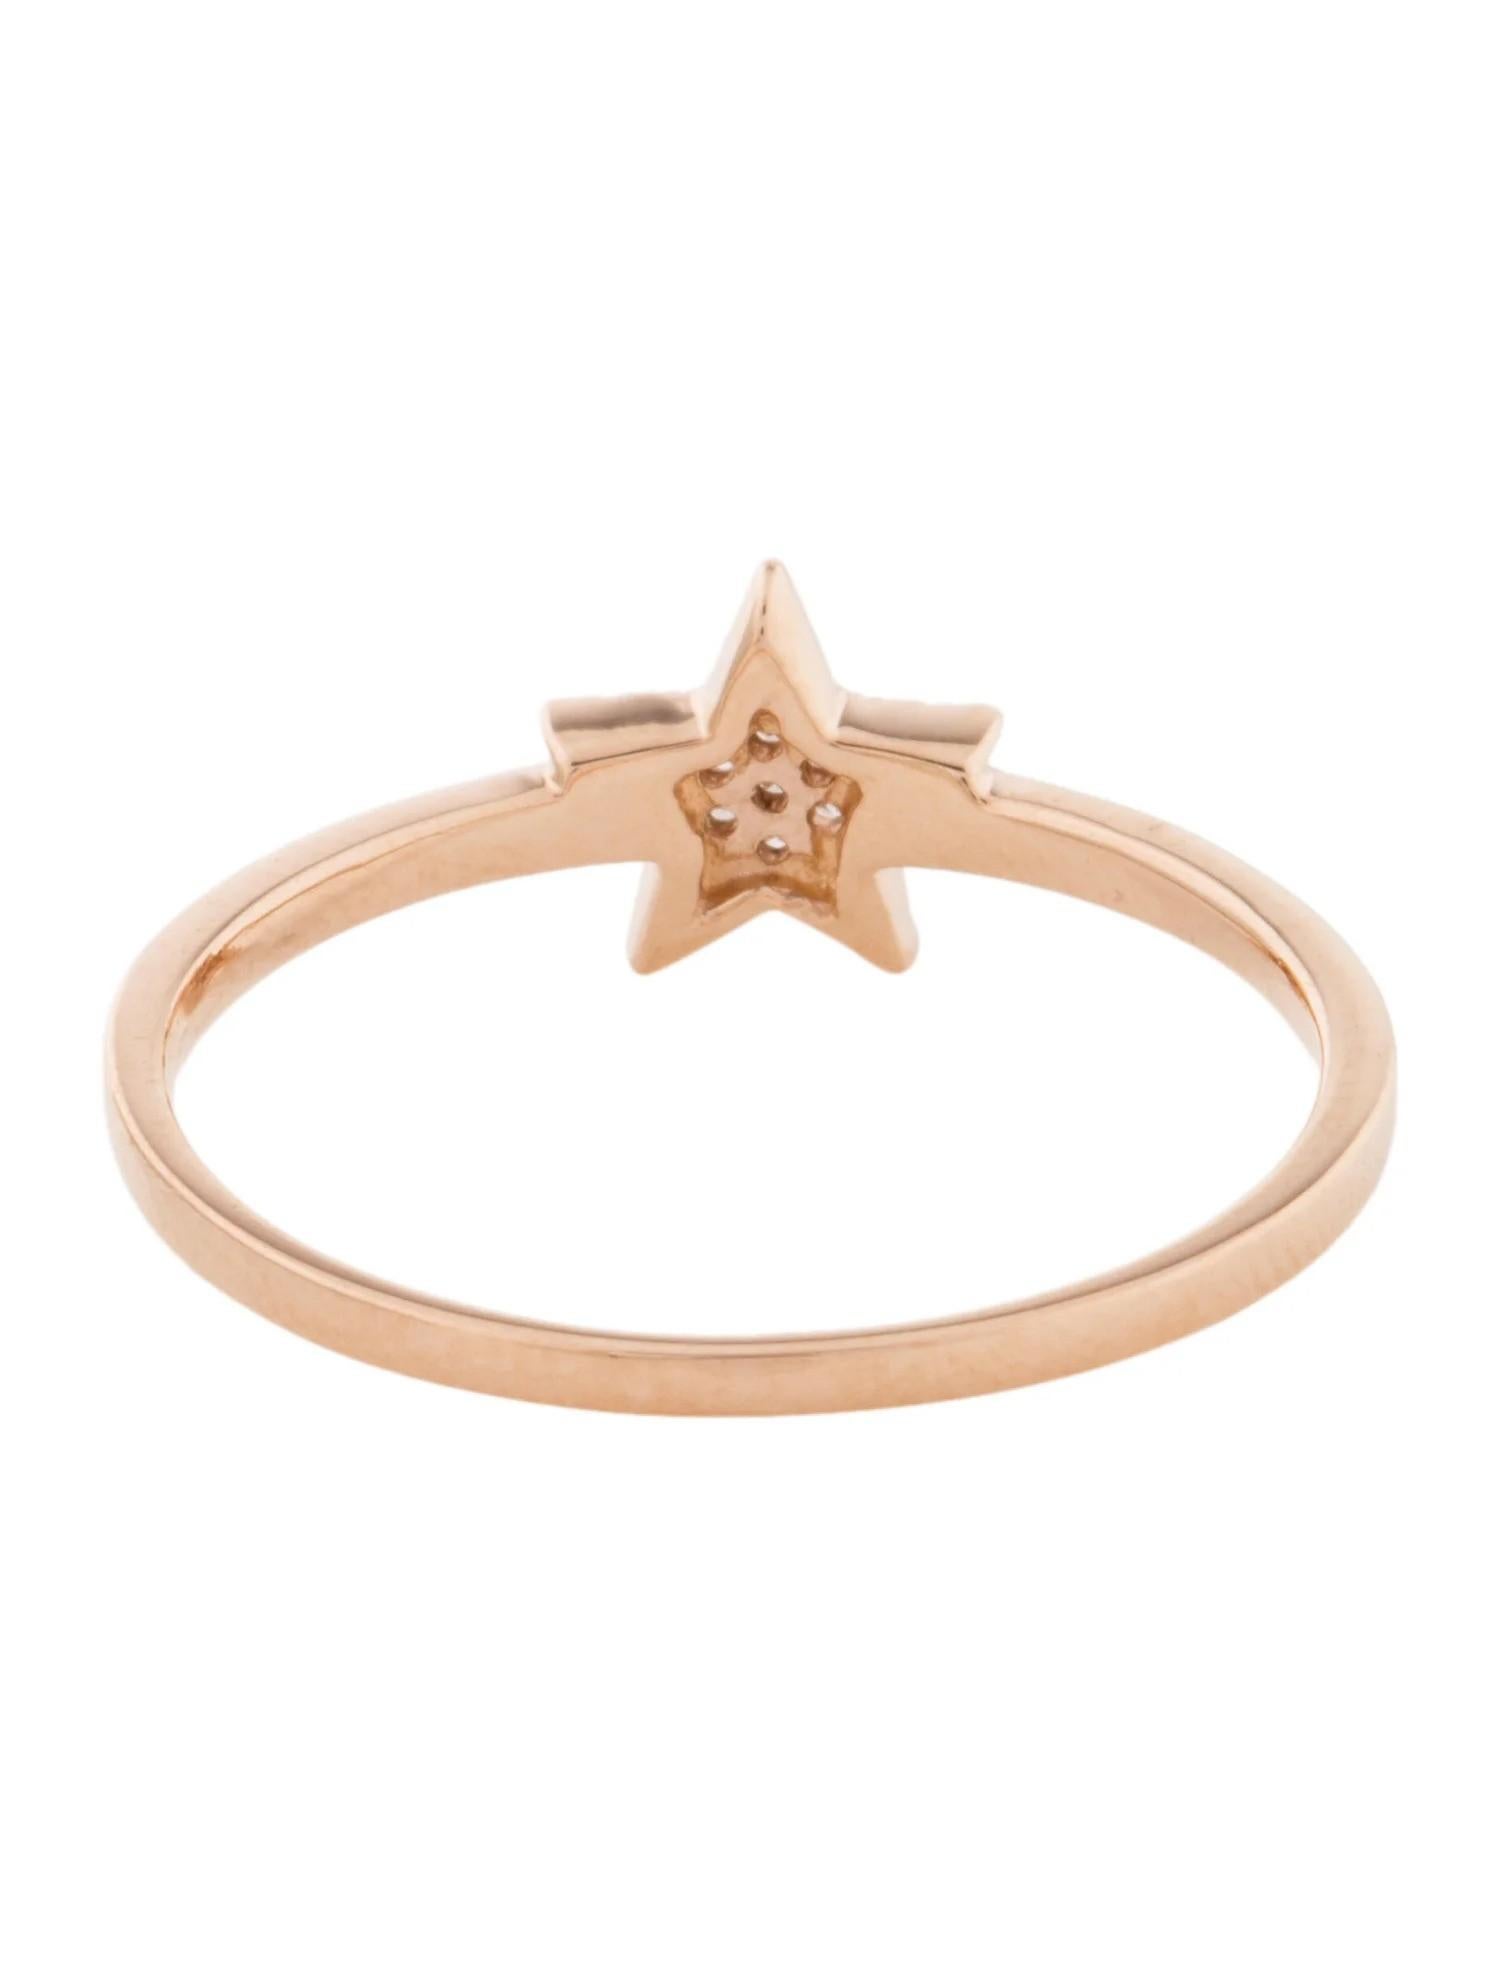 0.05 Carat Diamond Star Cluster Rose Gold Fashion Ring In New Condition For Sale In Great Neck, NY